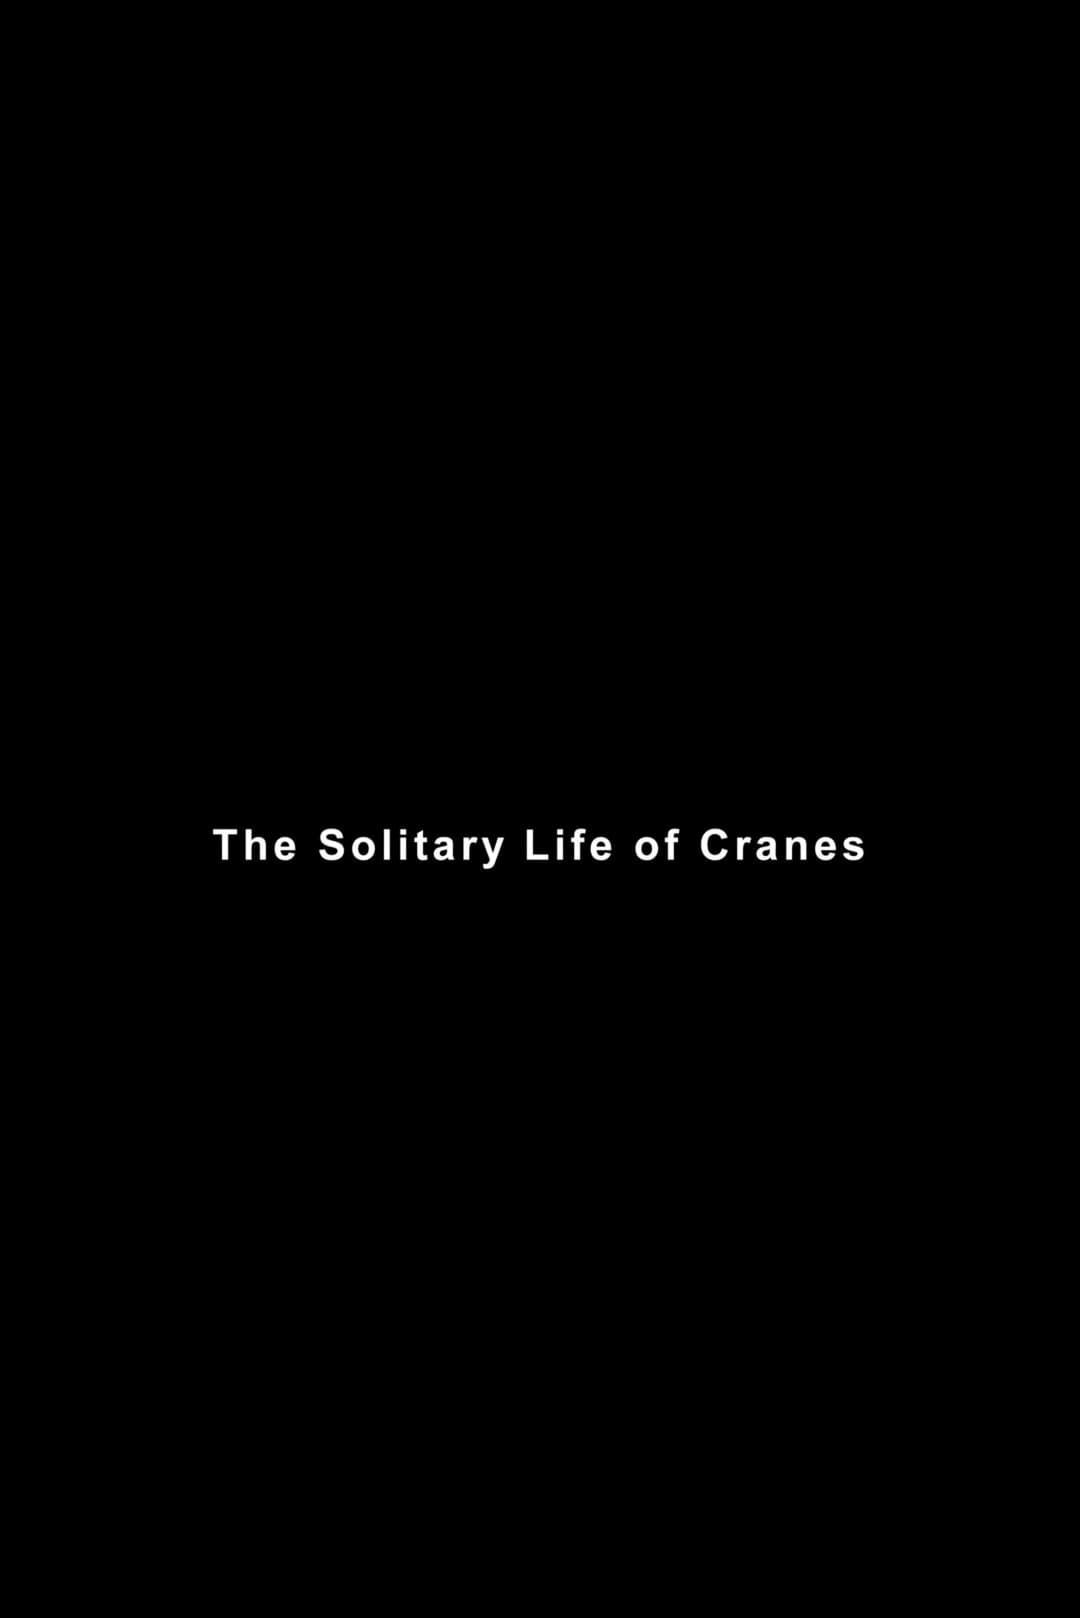 The Solitary Life of Cranes